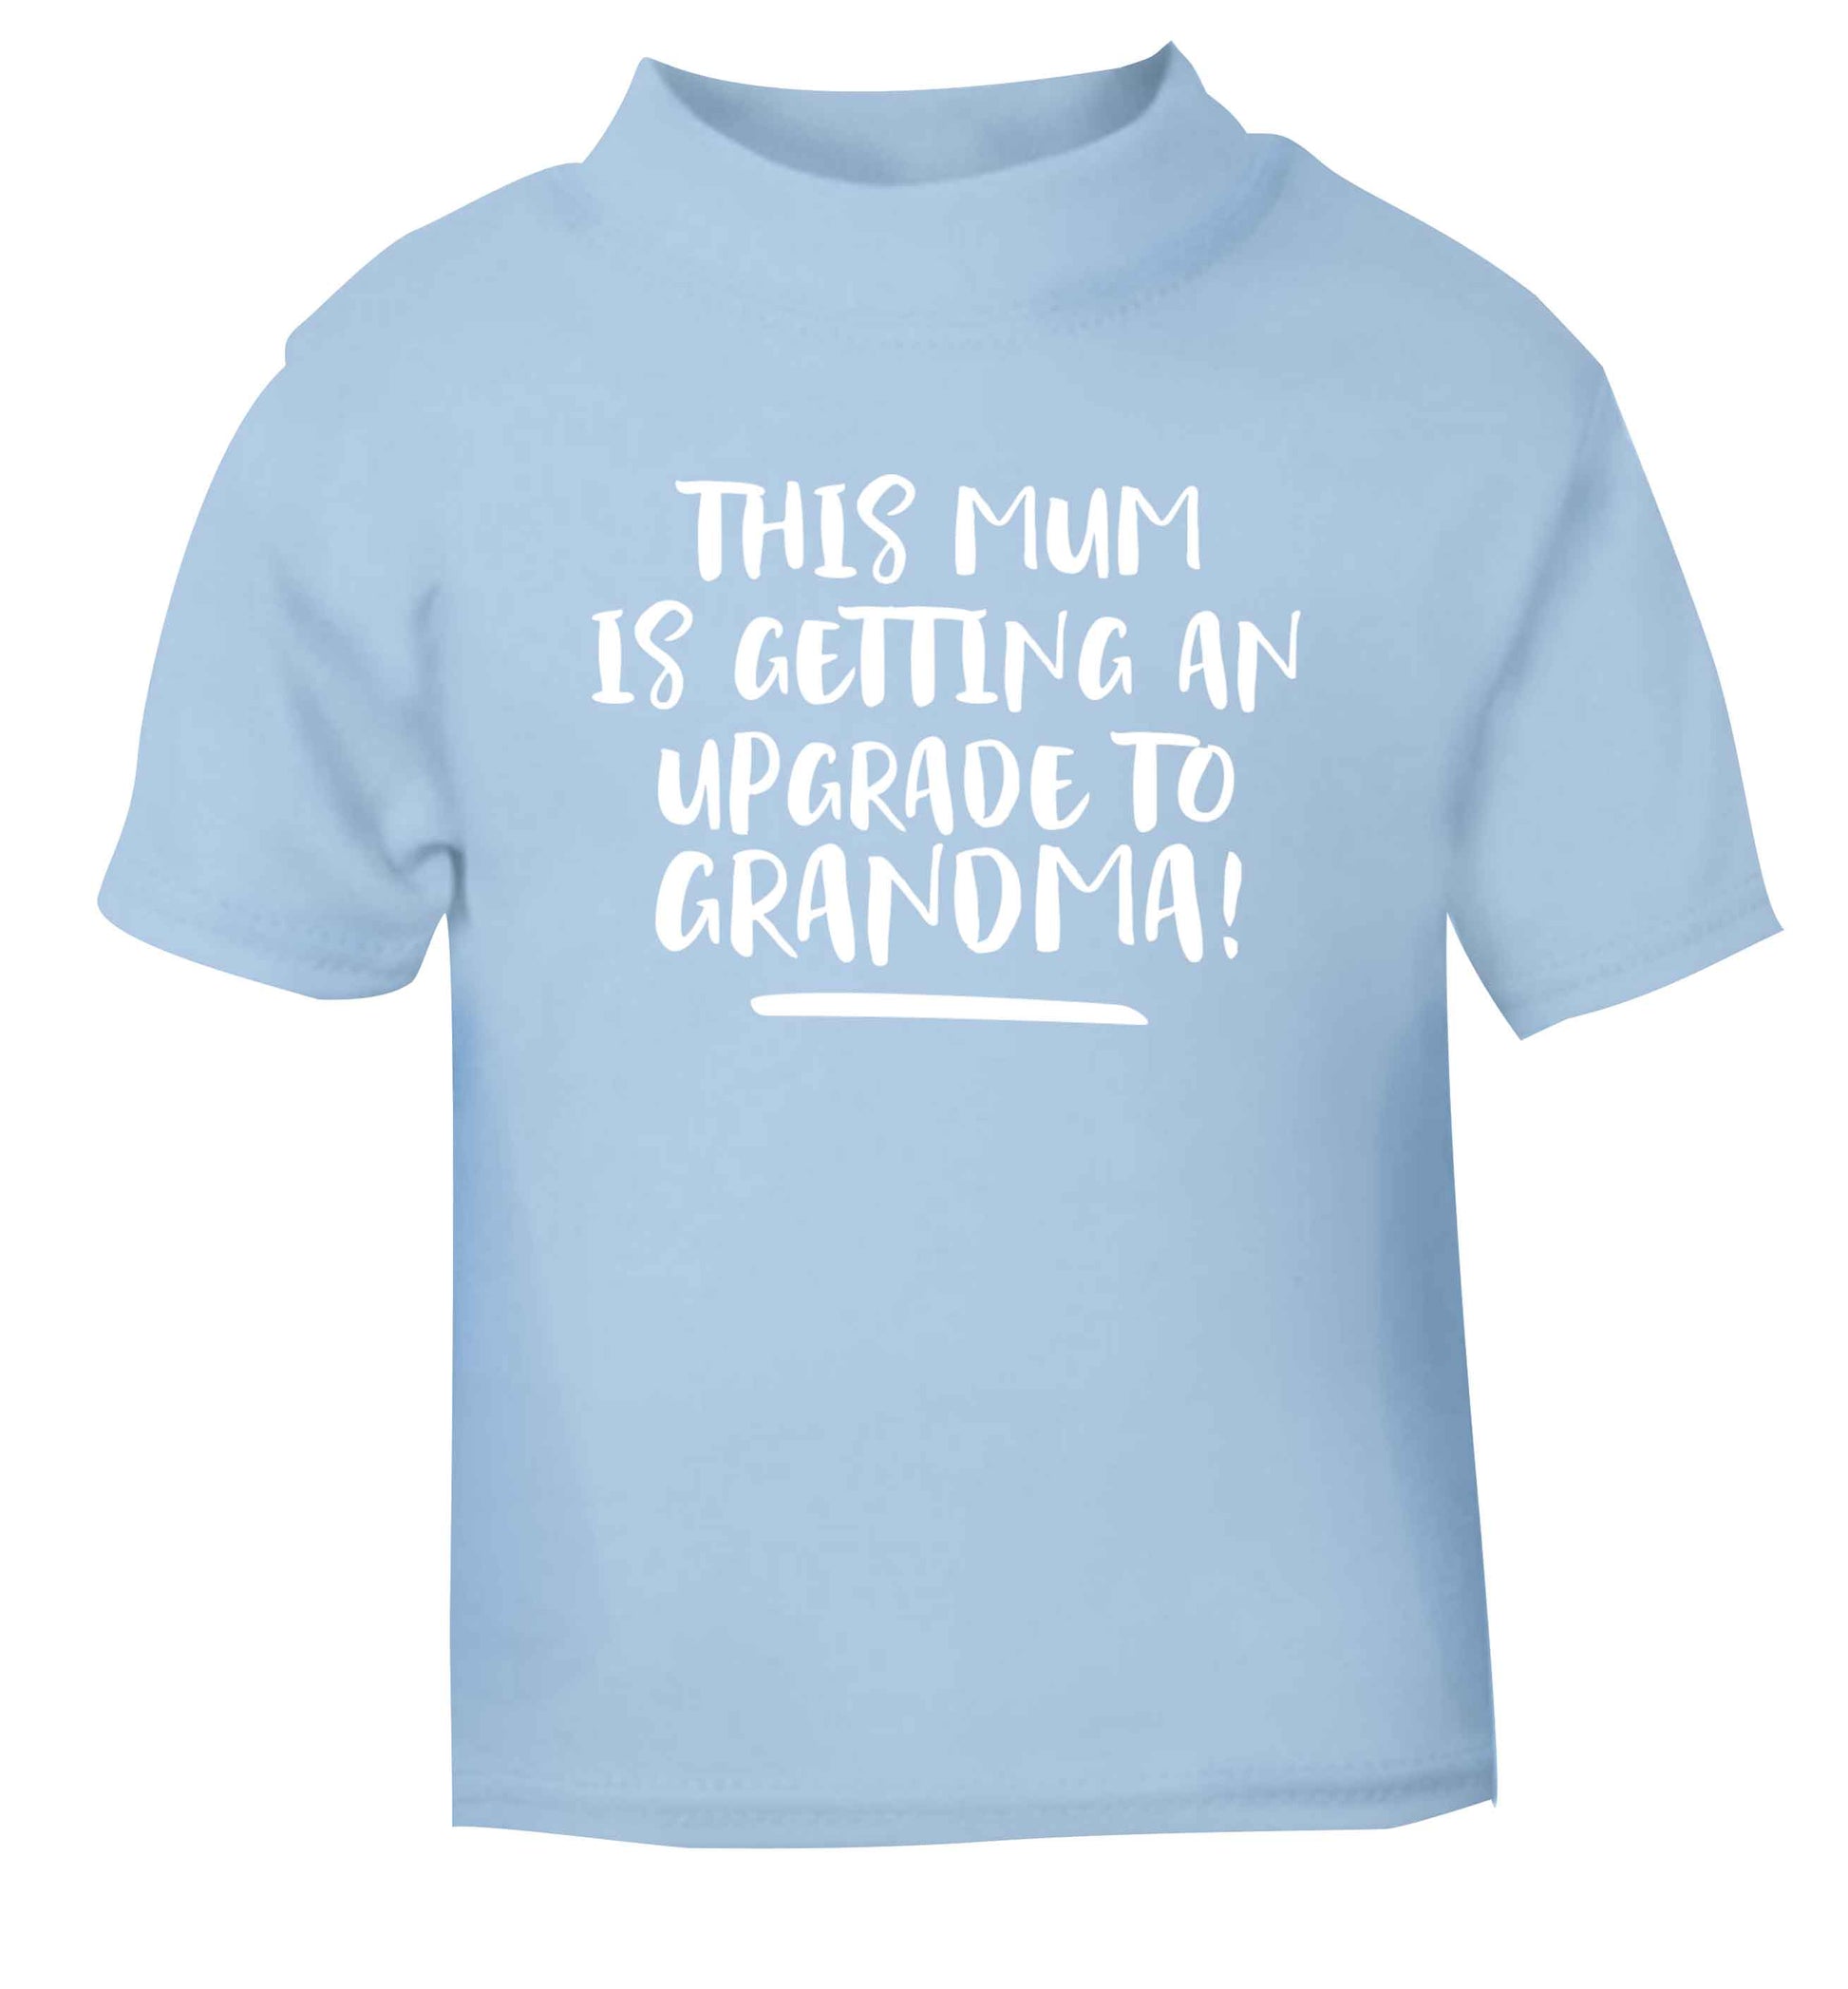 This mum is getting an upgrade to grandma! light blue Baby Toddler Tshirt 2 Years